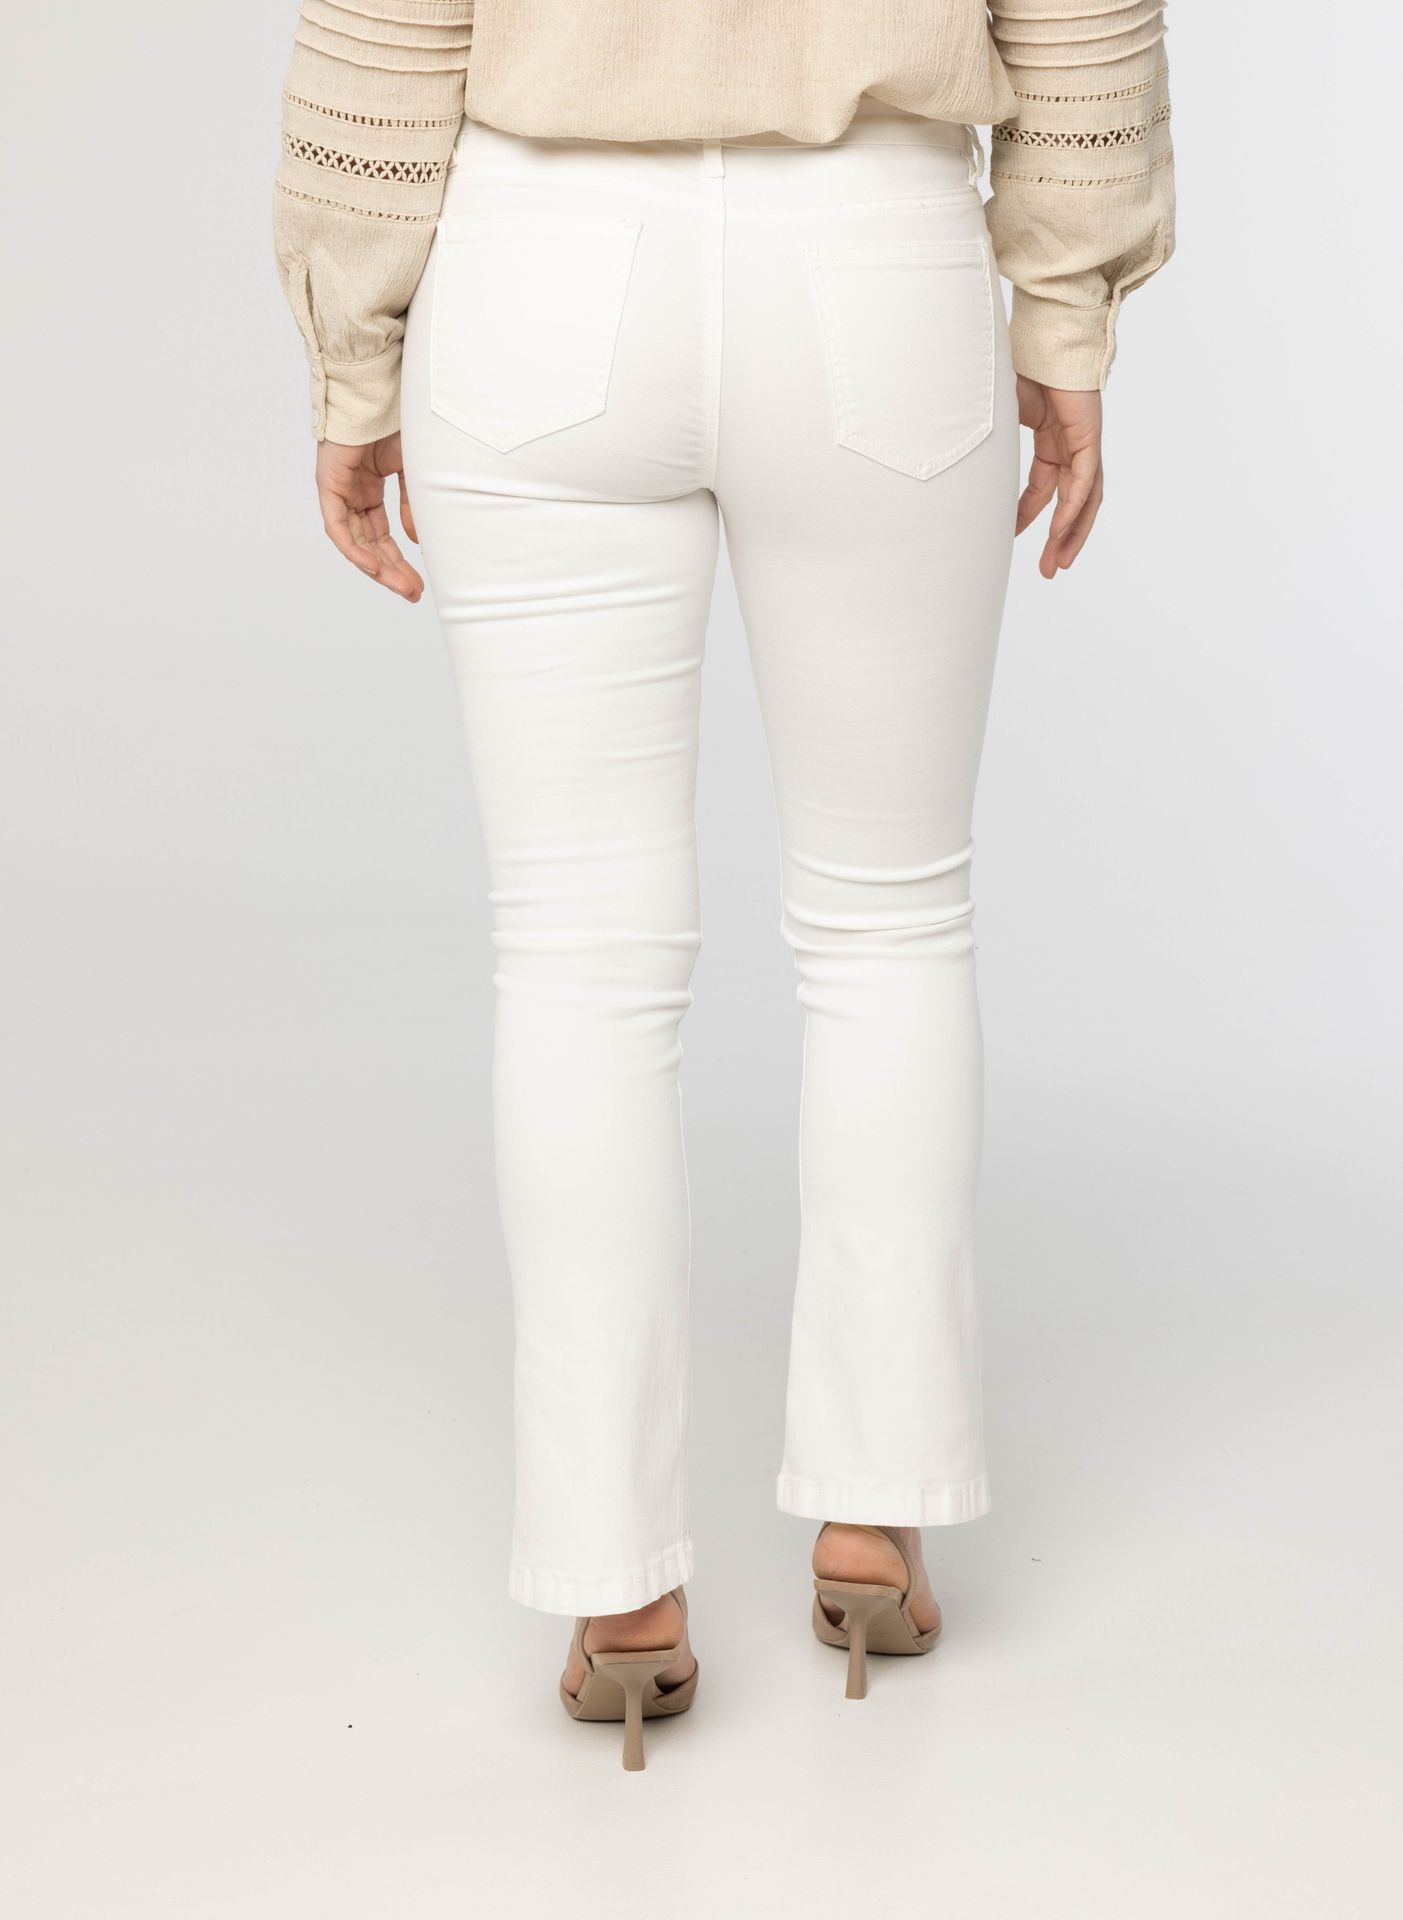 Norah Witte flared jeans white 212358-100